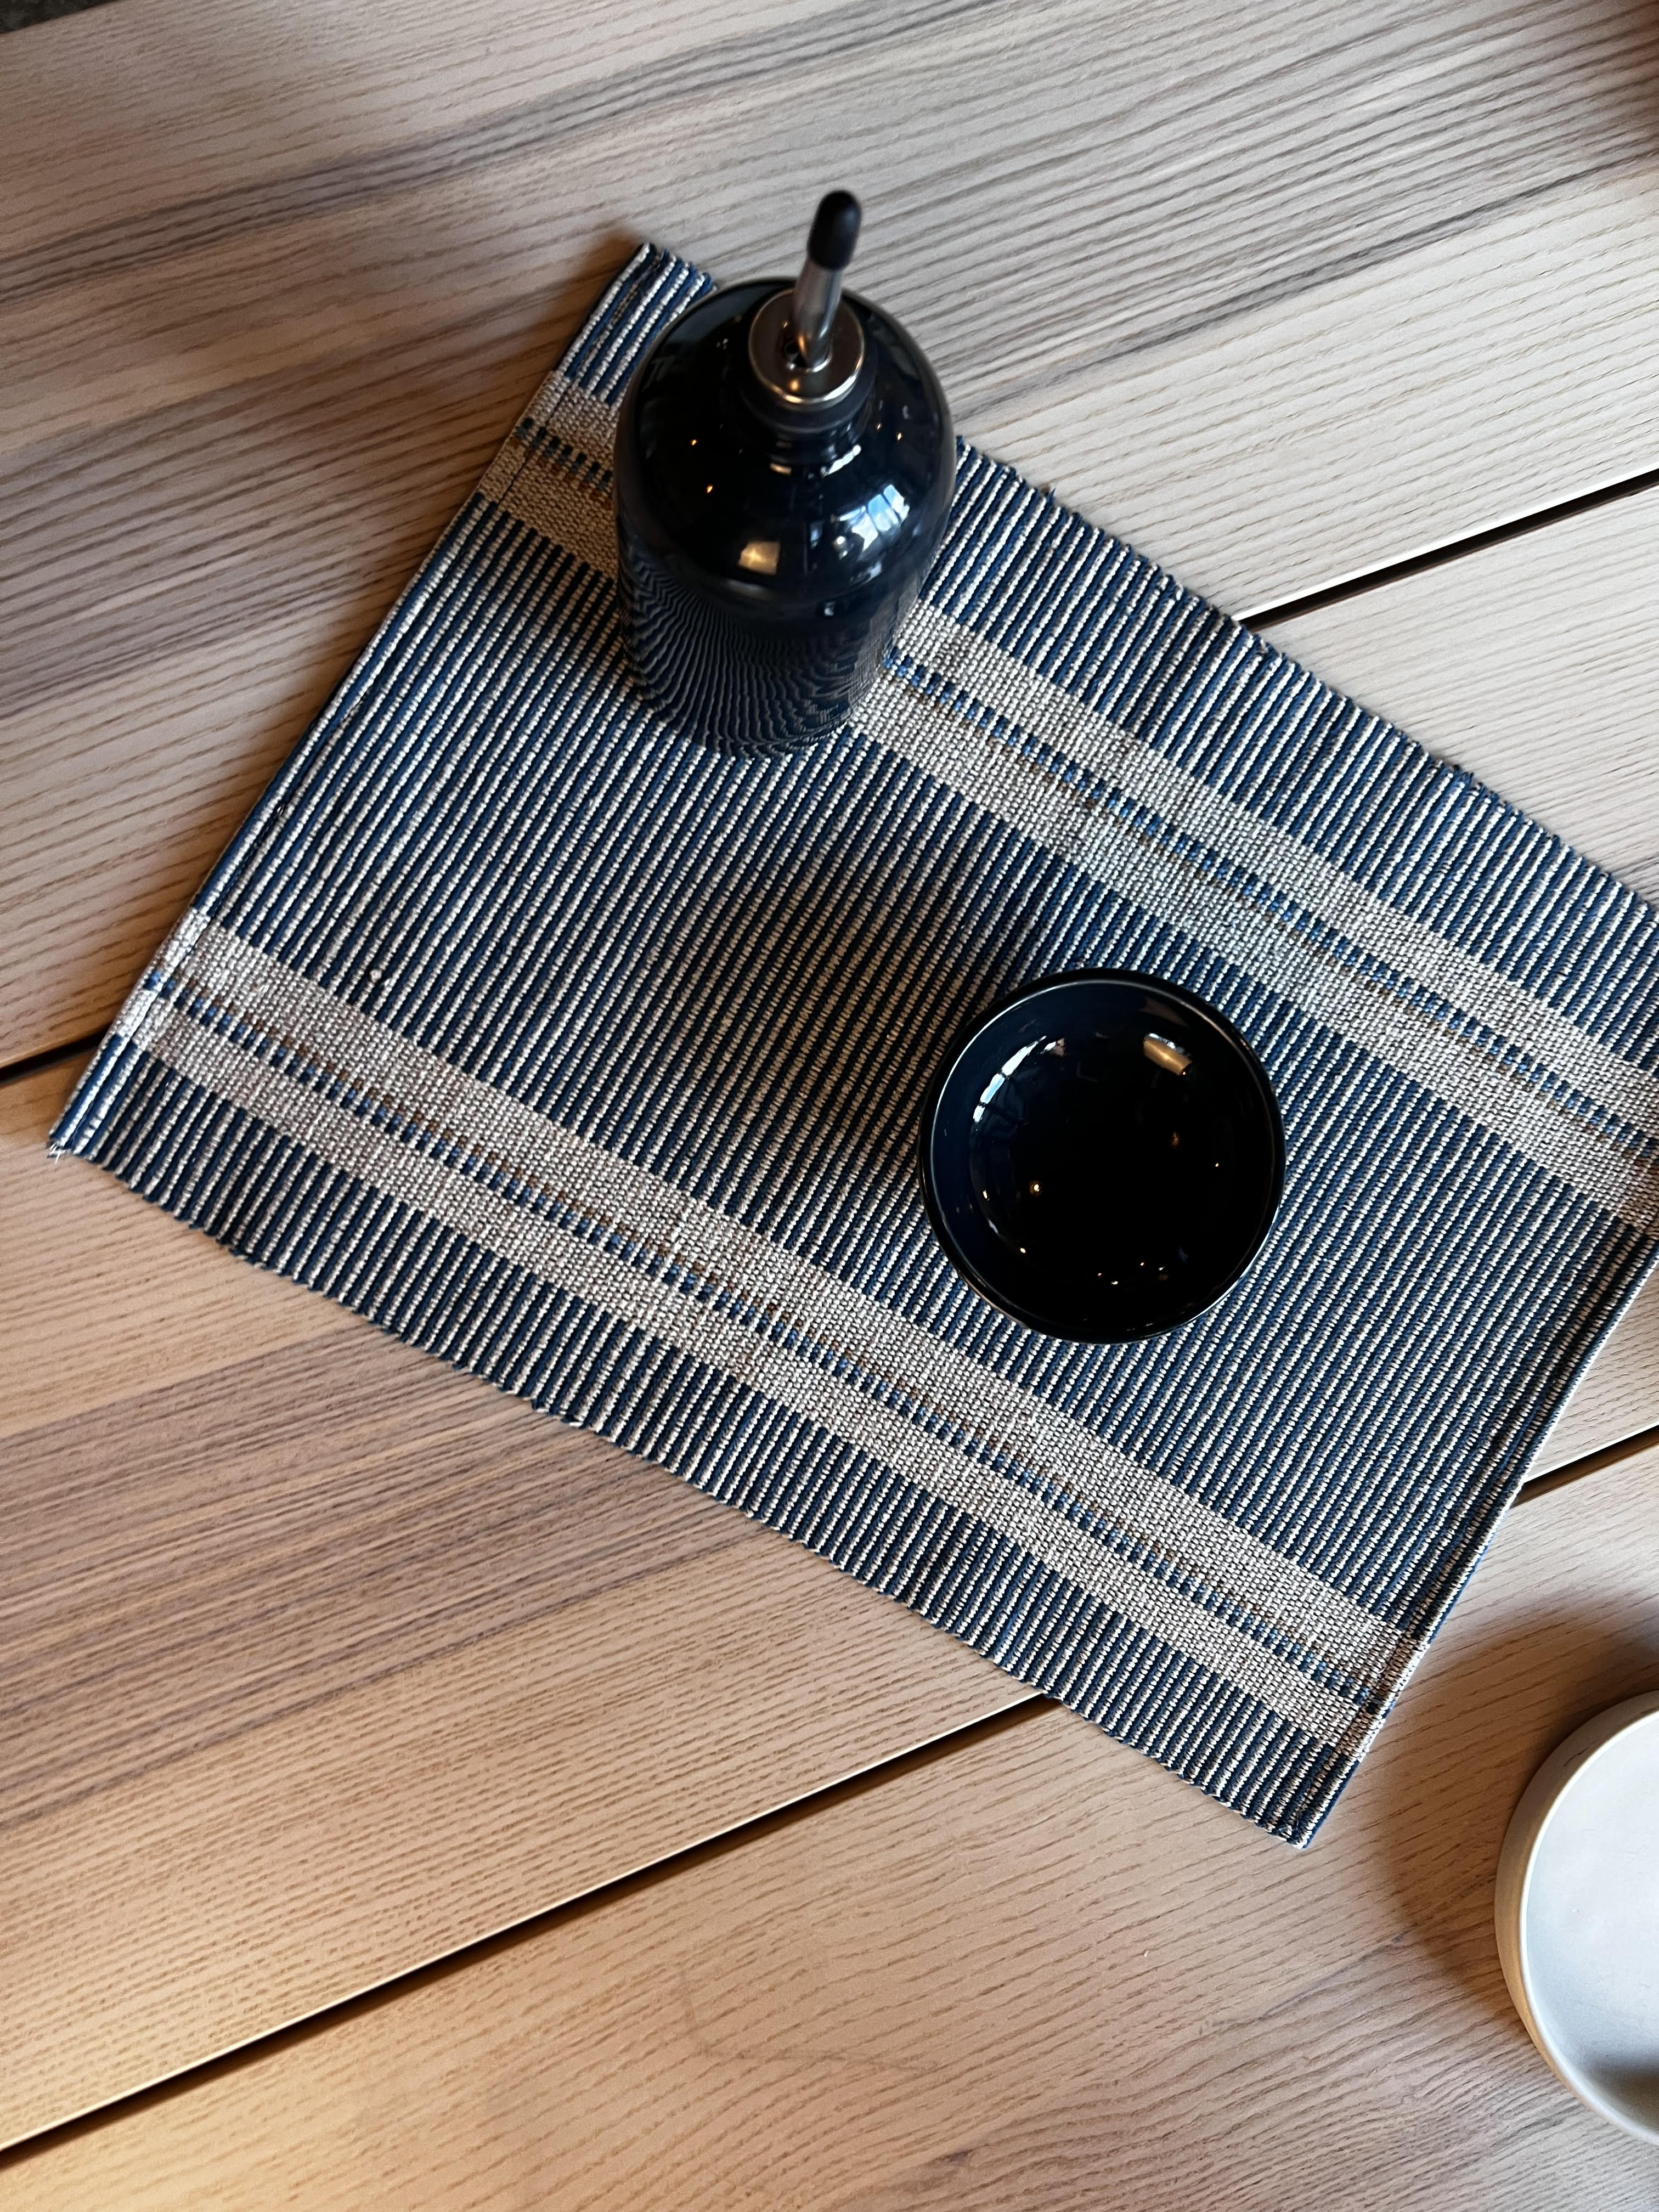 Stripped placemat on a table with dishes on it